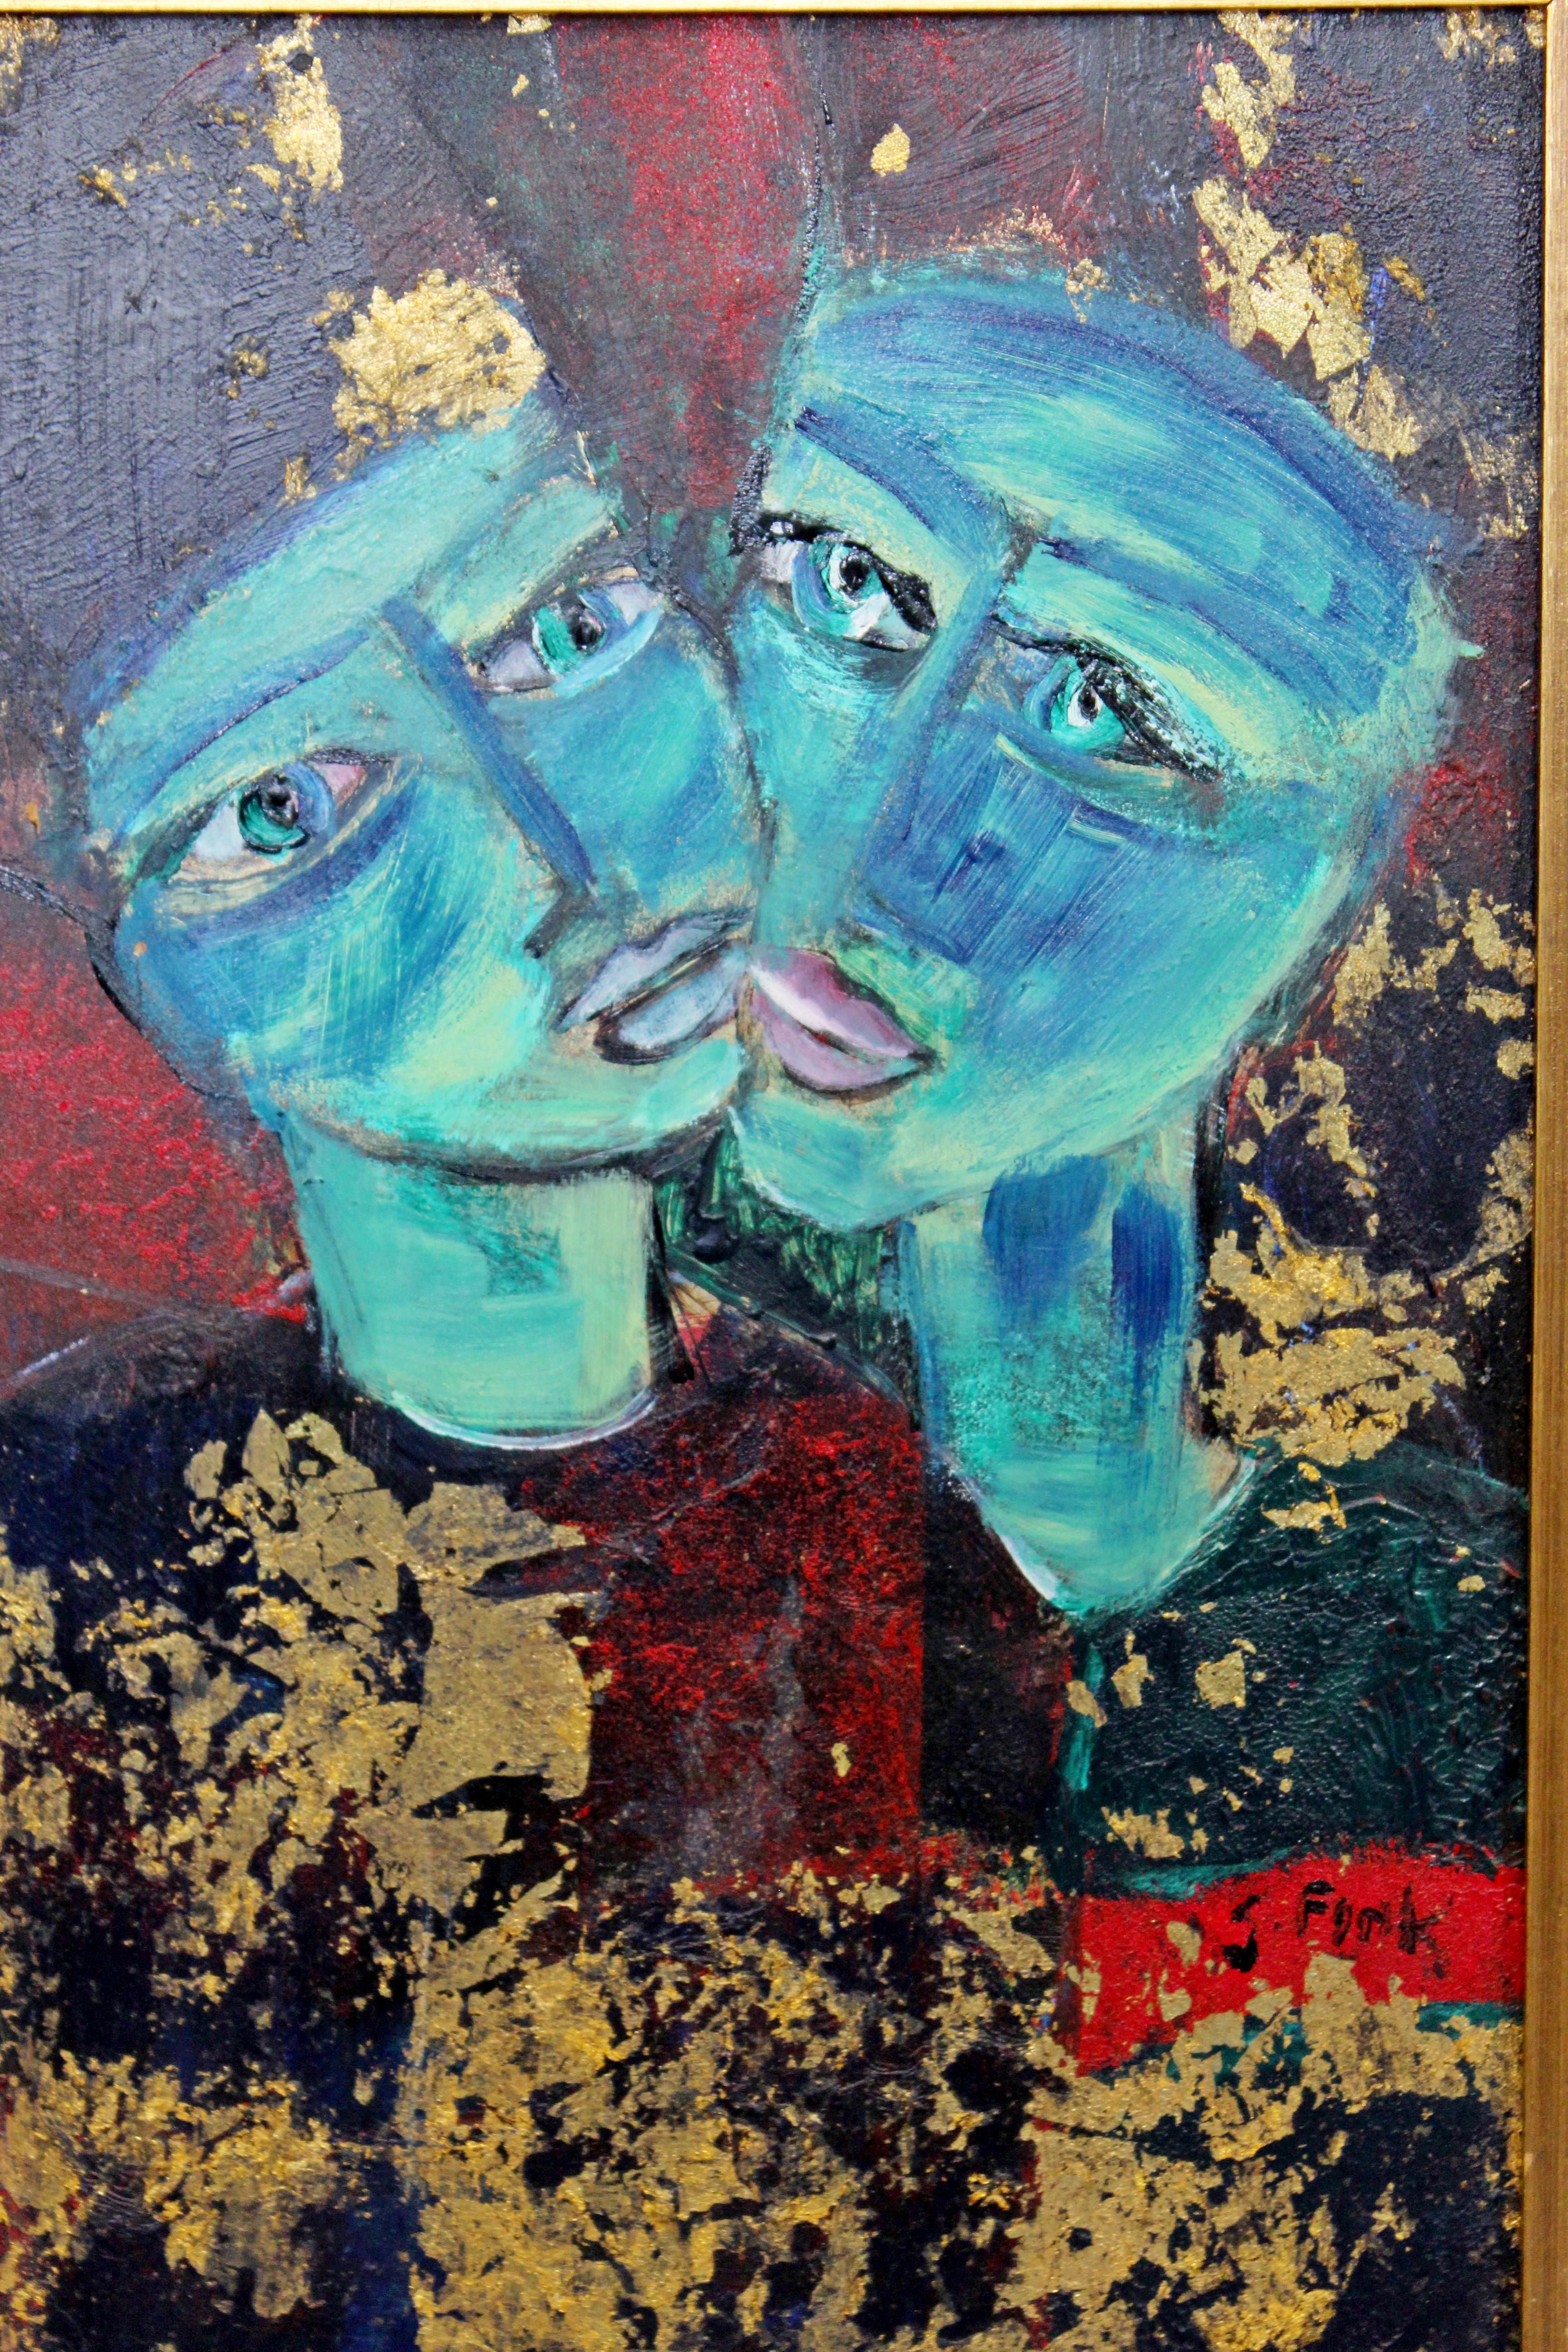 For your consideration is an incredible oil painting, with gold leaf to make it shimmer, of two blue figures, signed by renowned Brazilian artist Gregory Fink. In excellent vintage condition. The dimensions are 14